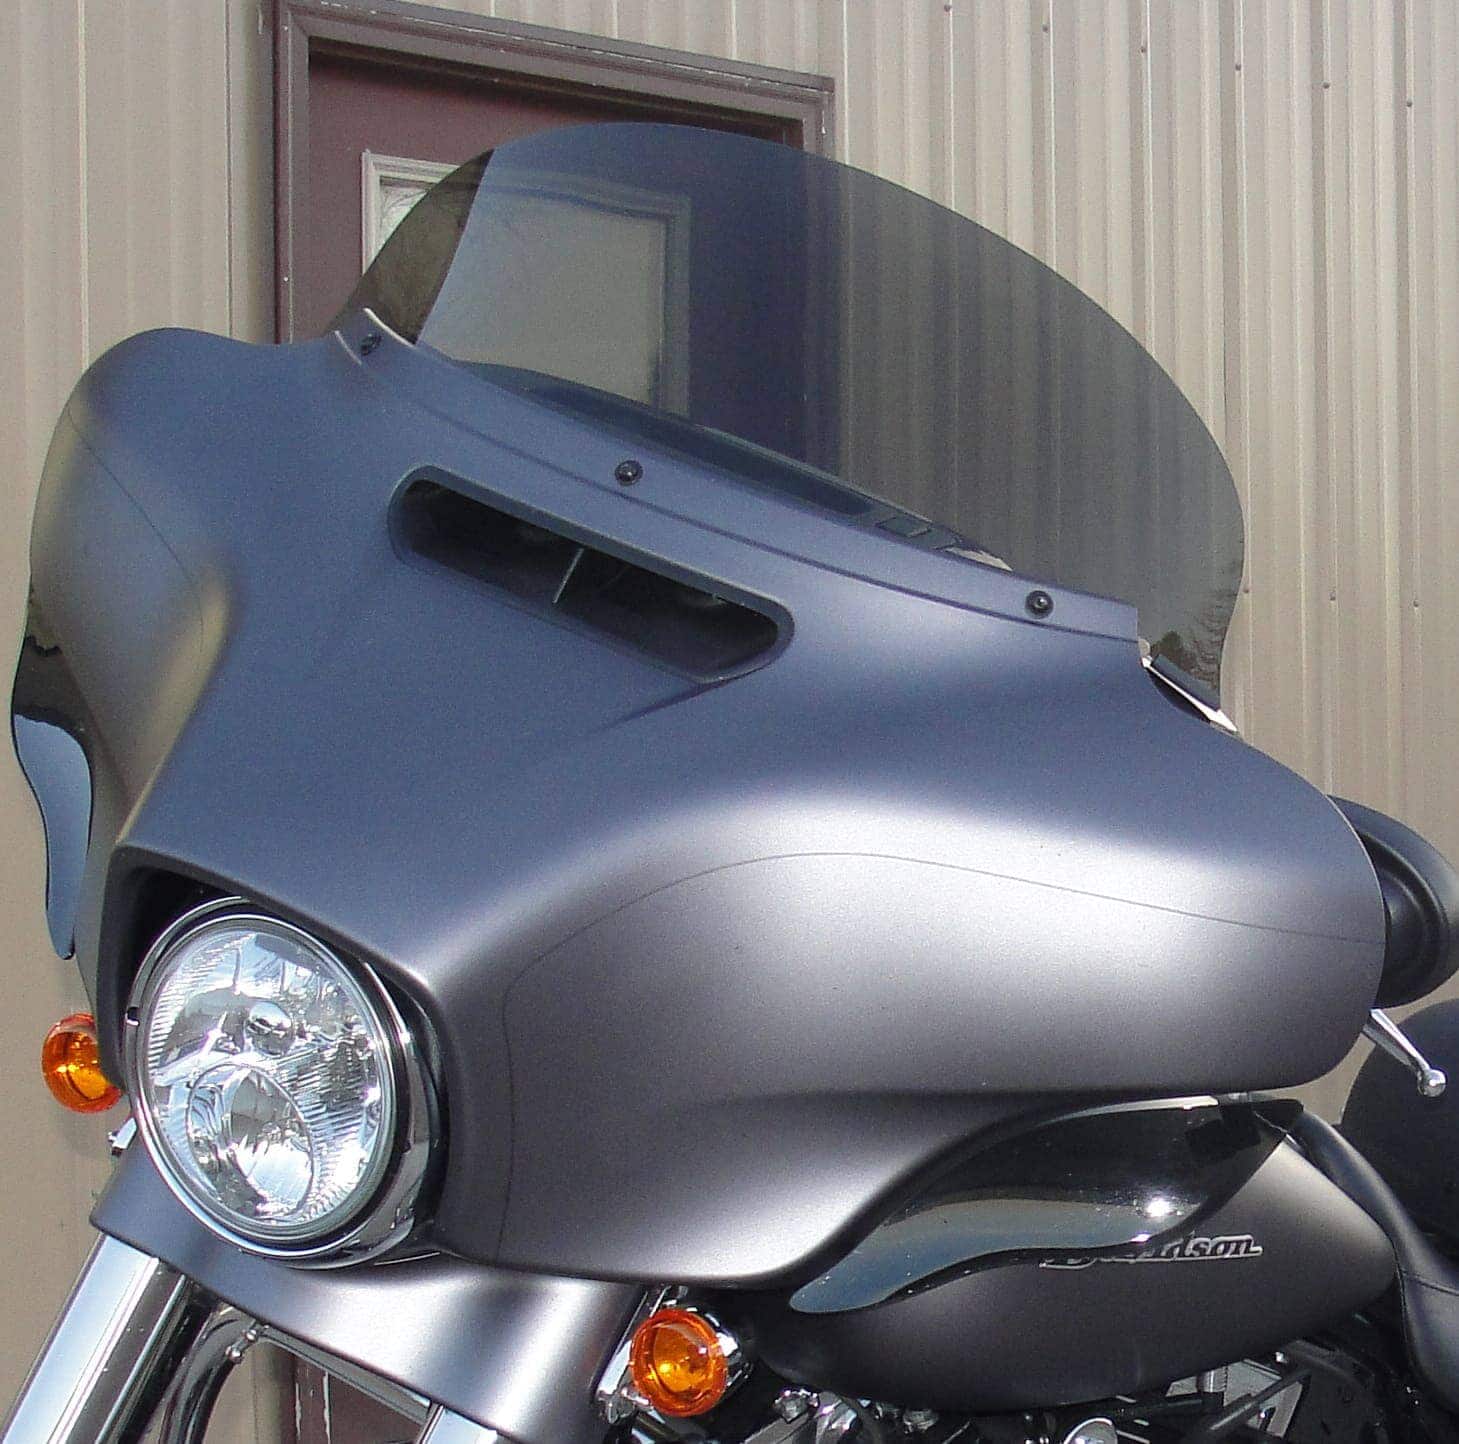 NEW 1 x US Motorcycle Windshield Fit for Harley Street Glide 2014-2016 POSSBAY